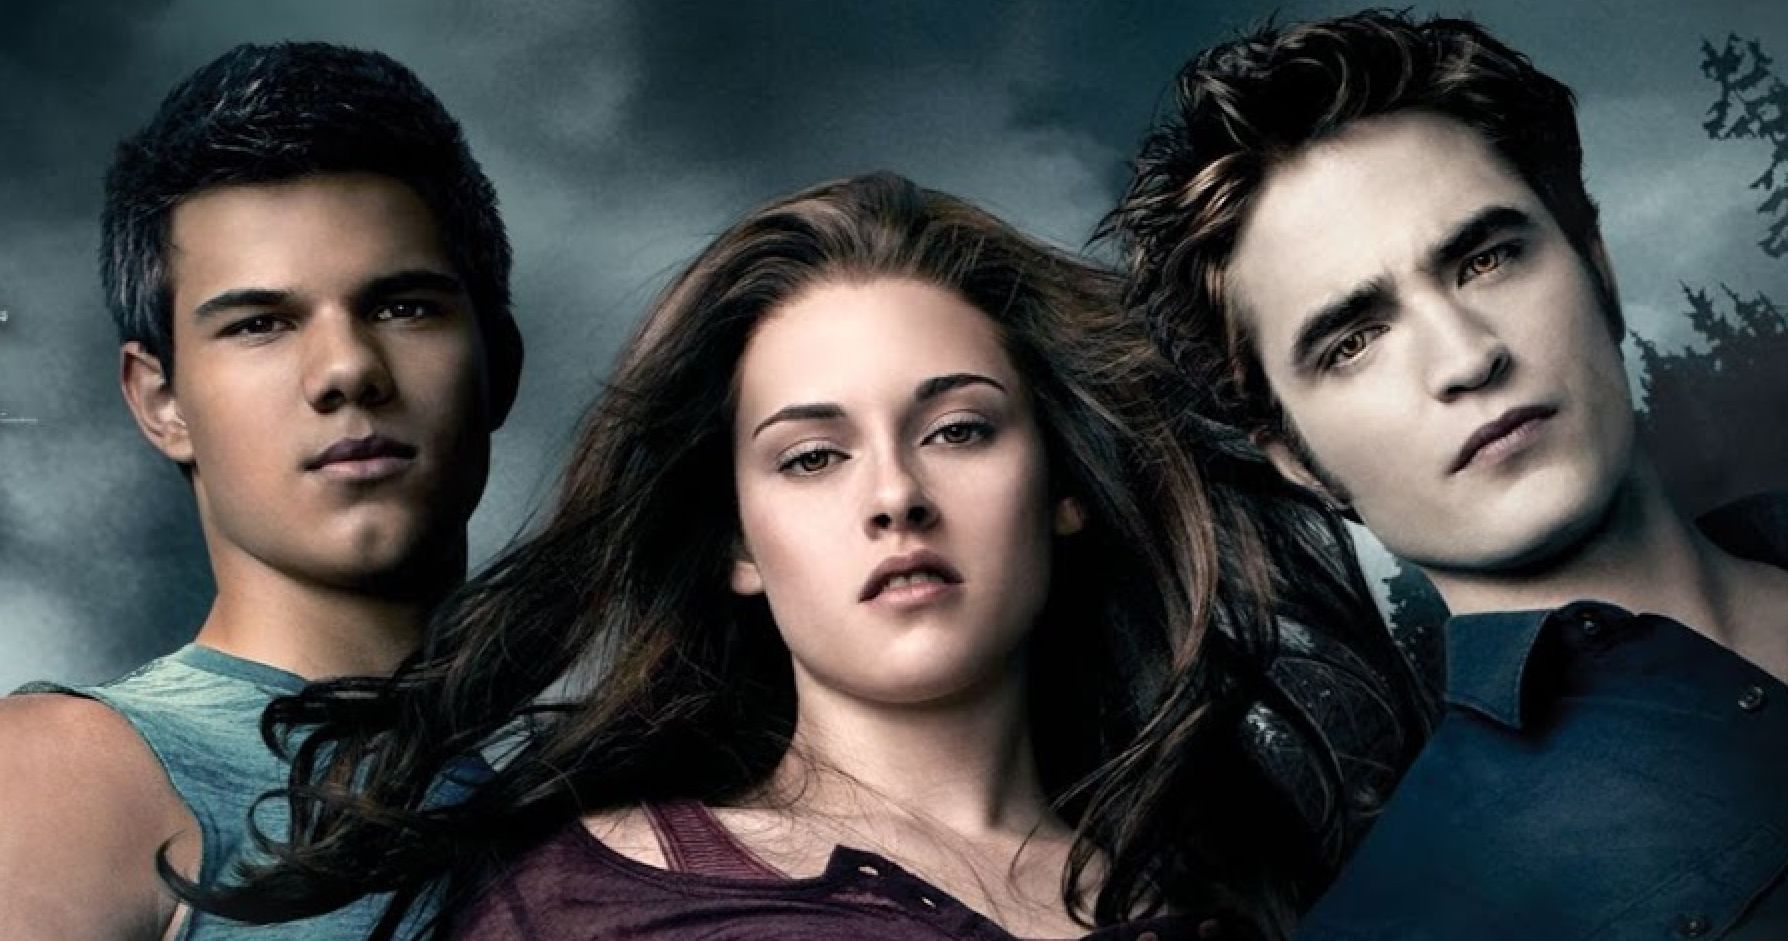 The Twilight Saga Hits Netflix in July and Fans Are Ready for It